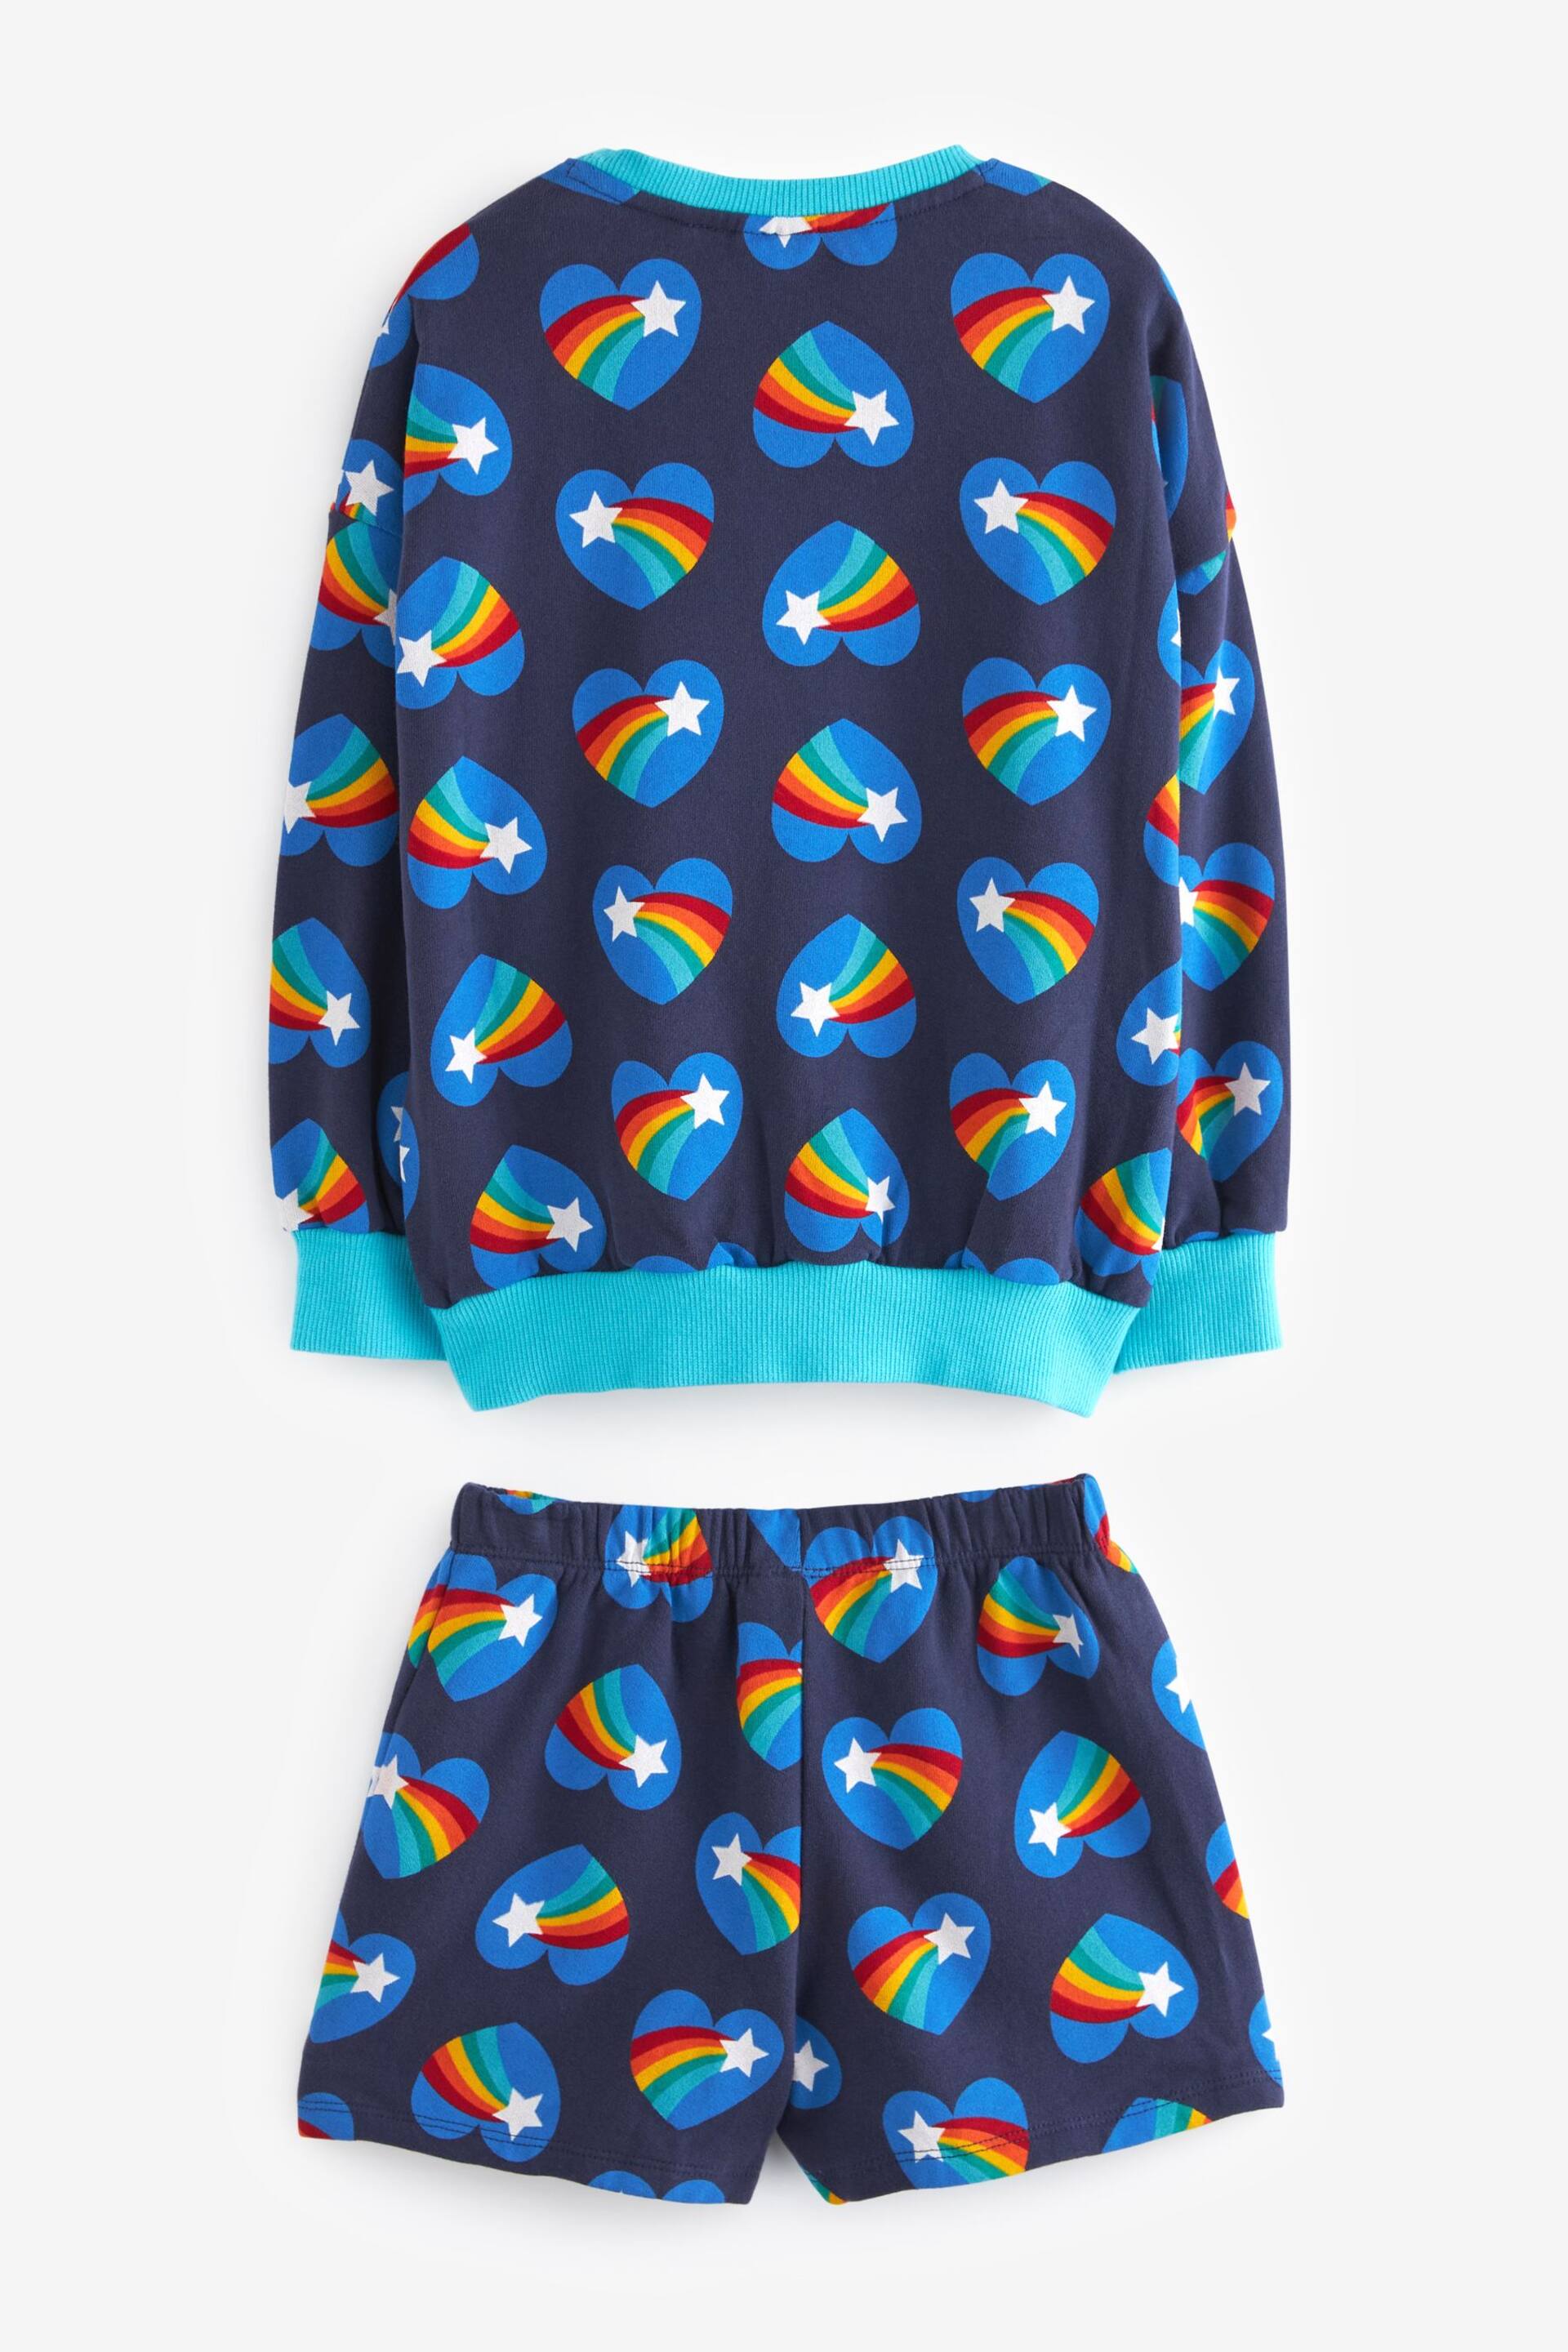 Little Bird by Jools Oliver Blue Rainbow Heart Sweat Top and Short Set - Image 5 of 7